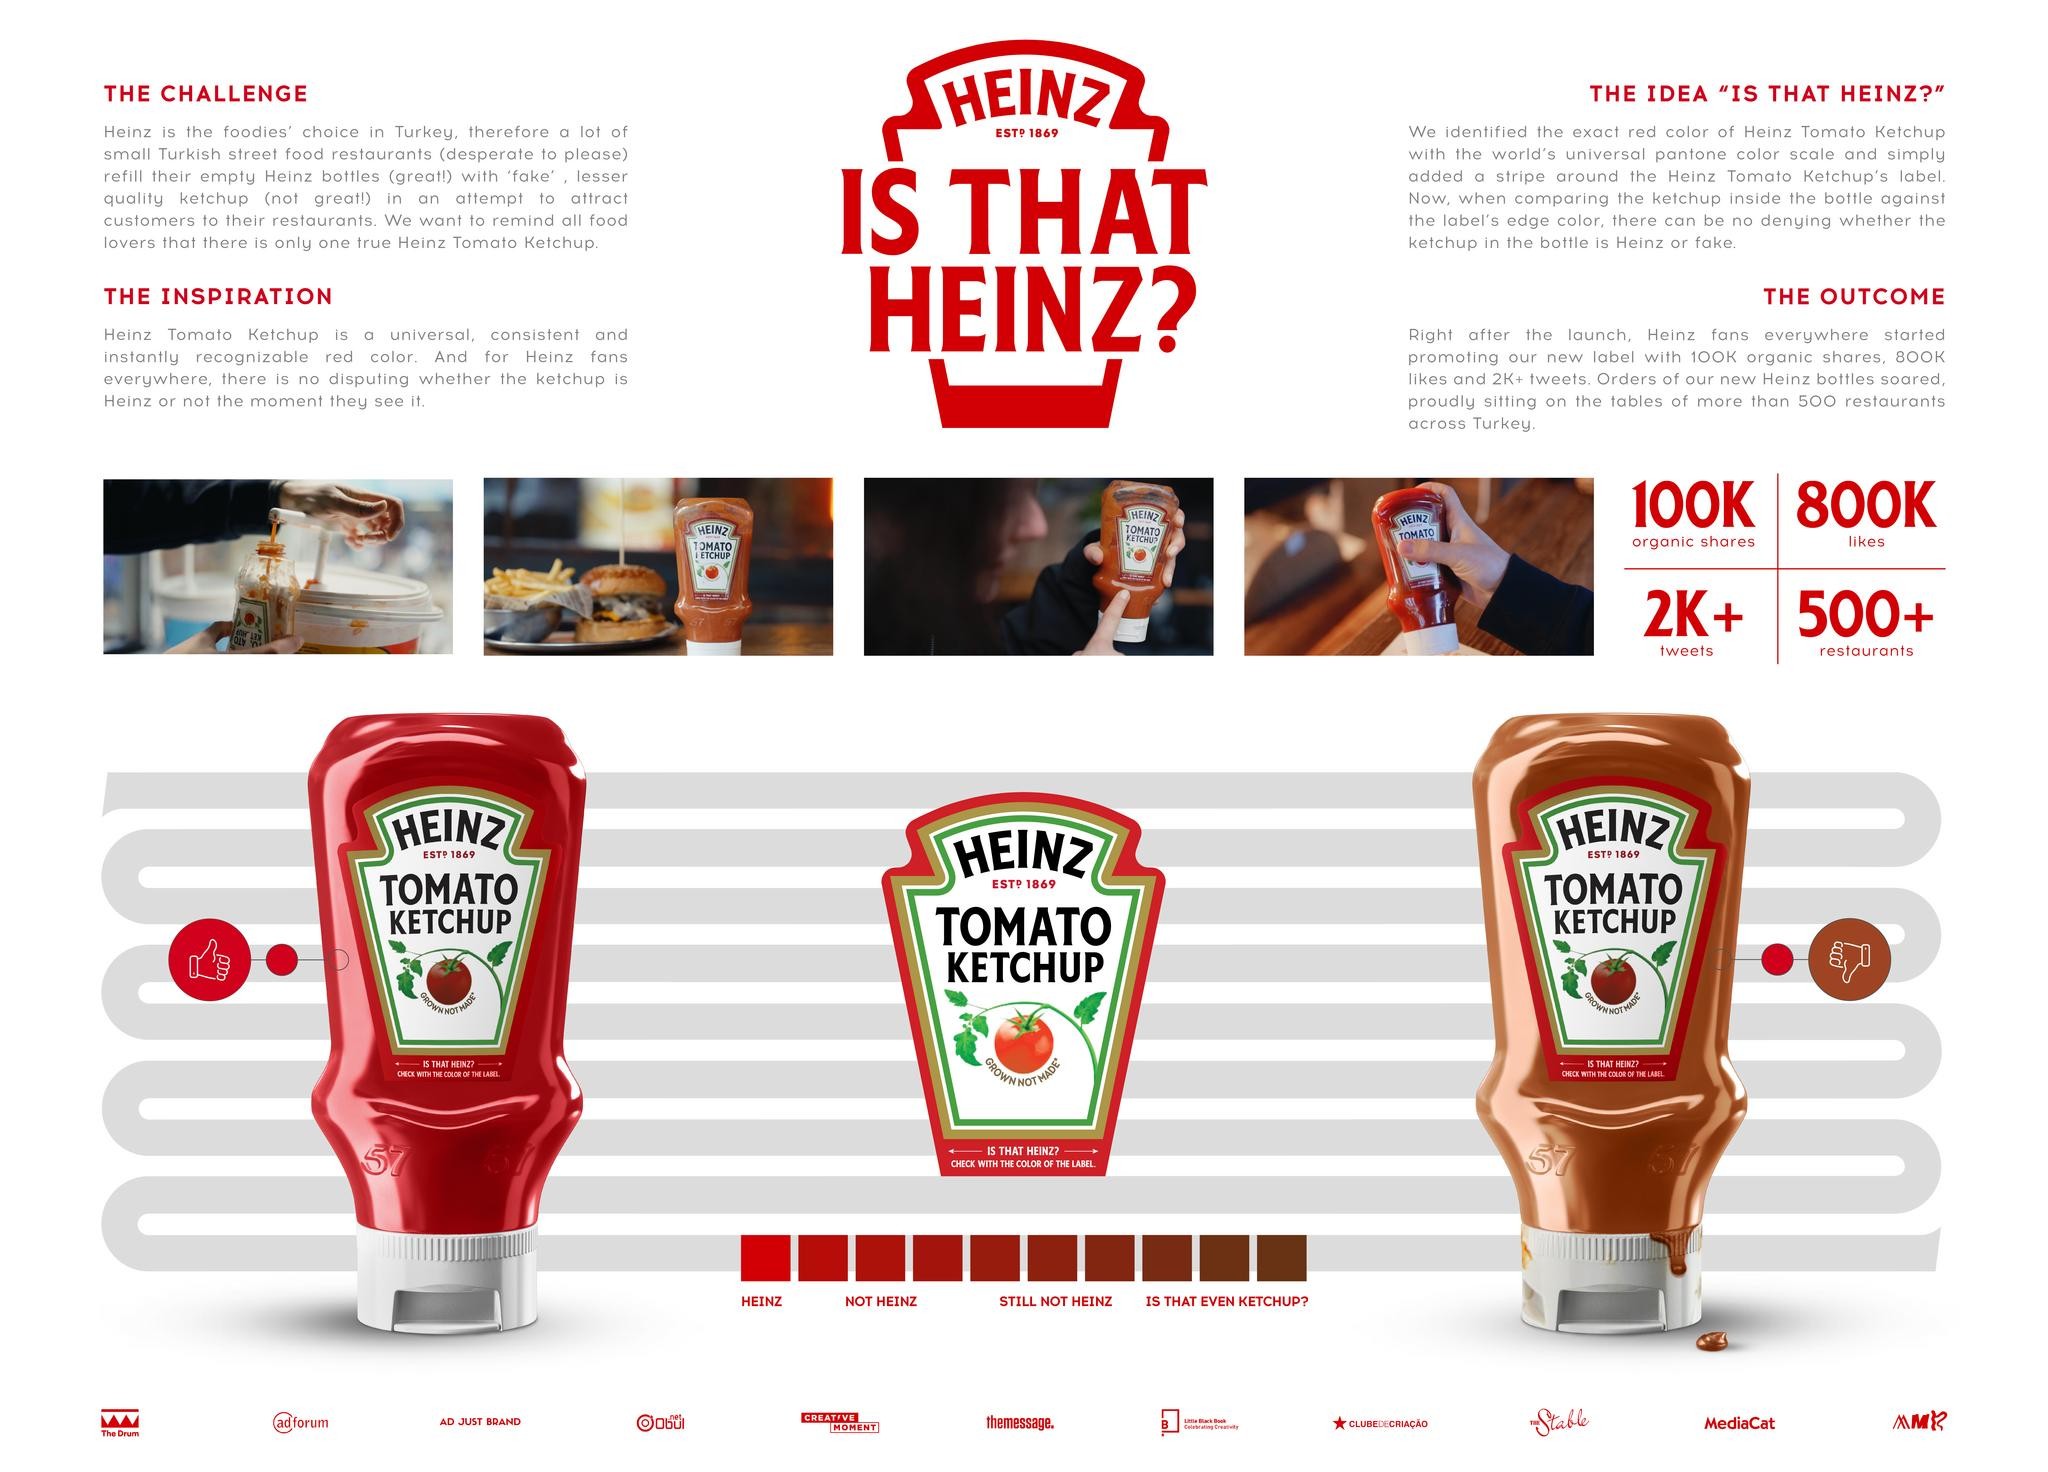 IS THAT HEINZ?